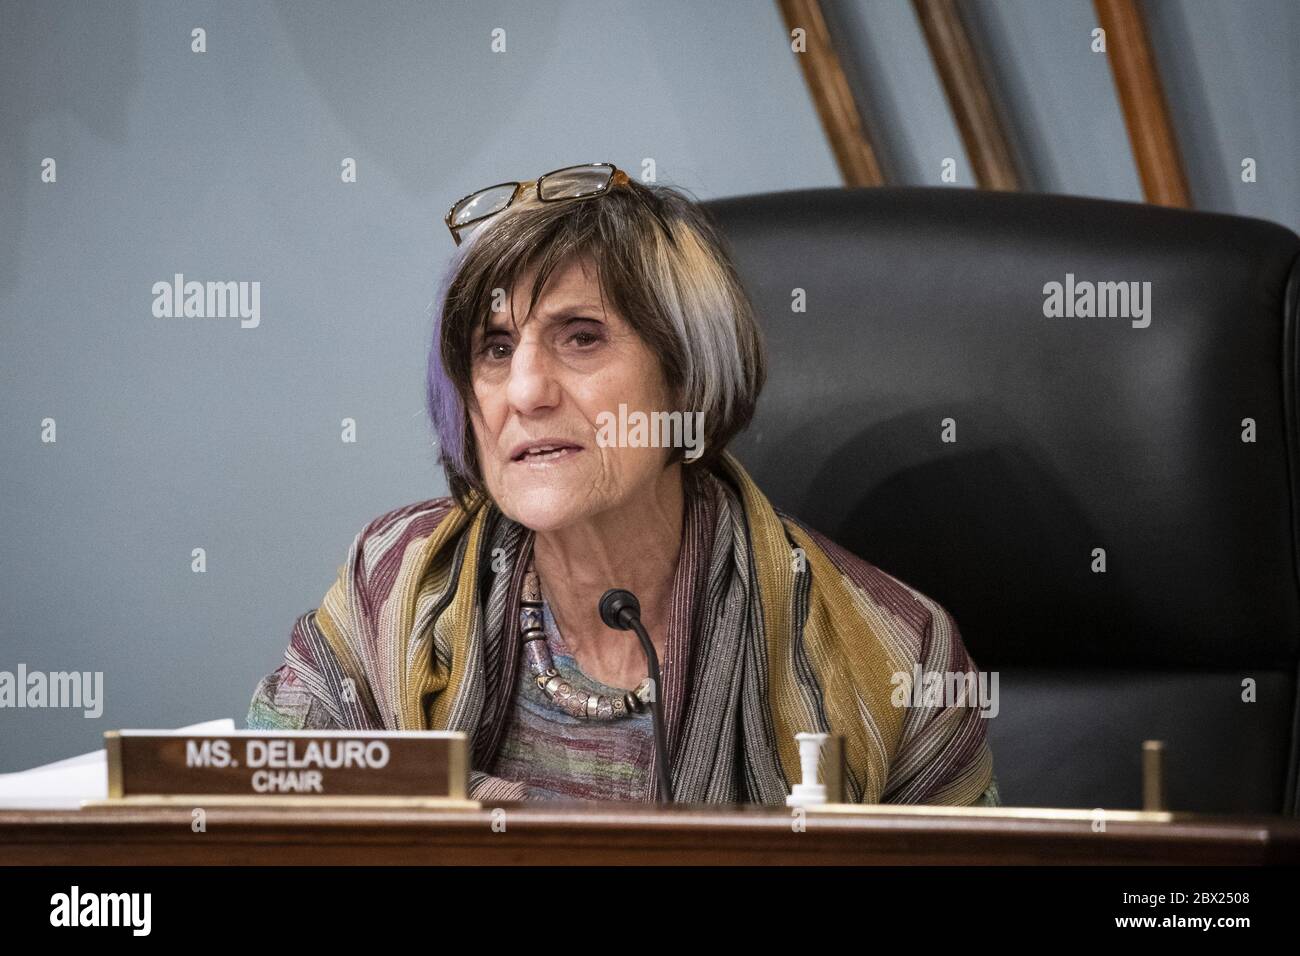 Washington, United States. 04th June, 2020. Representative Rosa DeLauro, a Democrat from Connecticut and chairwoman of the House Appropriations Subcommittee on Labor, Health and Human Services, Education, and Related Agencies, speaks during a hearing on Capitol Hill in Washington, DC on Thursday, June 4, 2020. Pool photo by Al Drago/UPI Credit: UPI/Alamy Live News Stock Photo